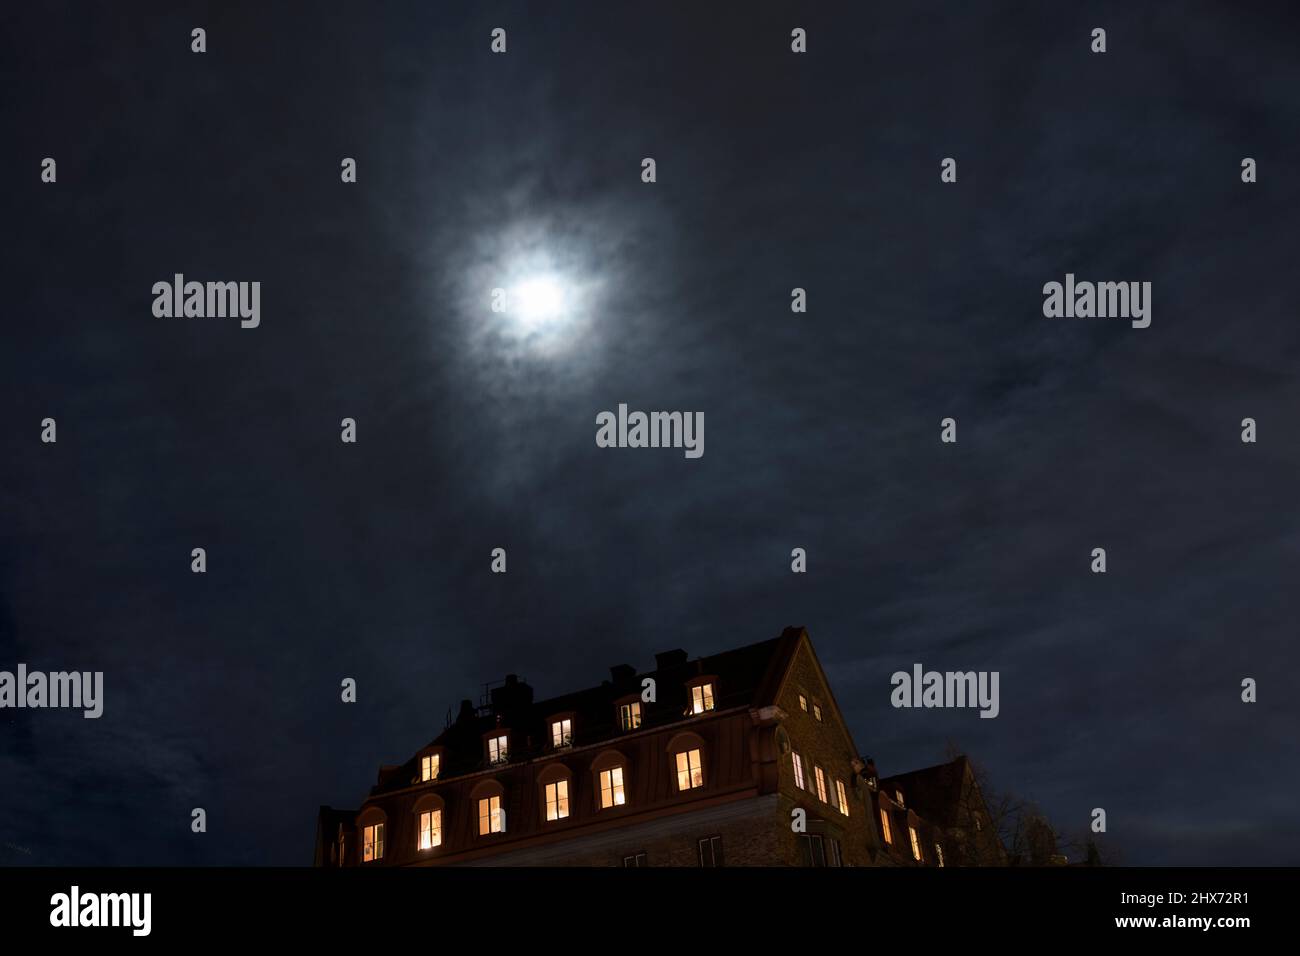 Moon over multistorey townhouses at night Stock Photo